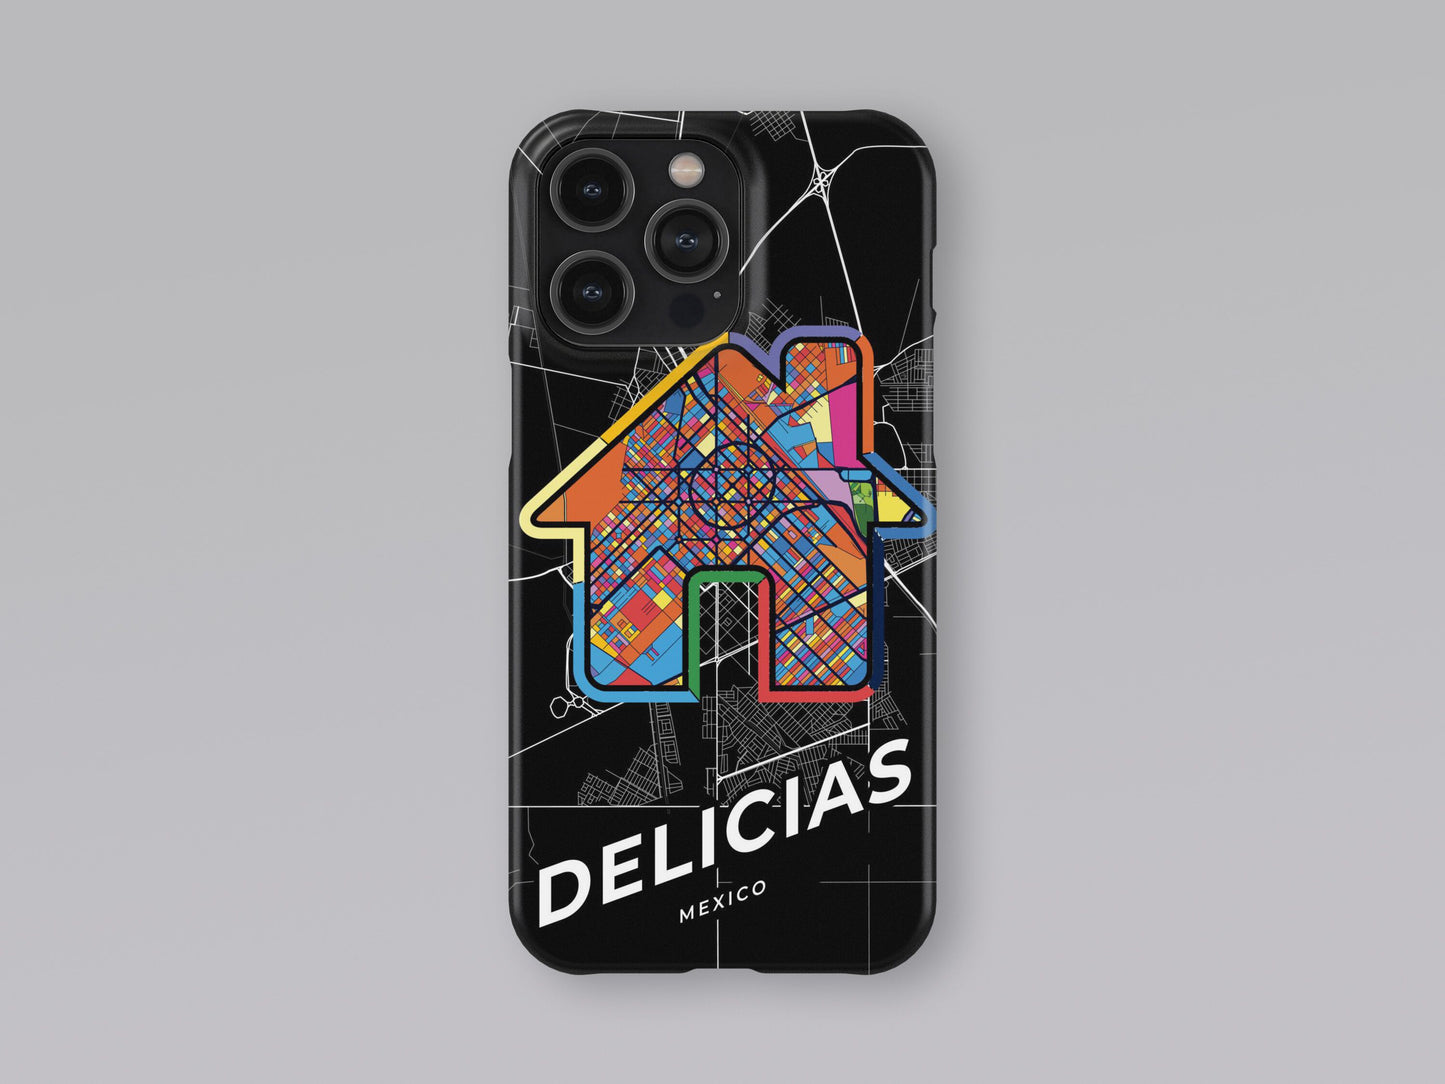 Delicias Mexico slim phone case with colorful icon. Birthday, wedding or housewarming gift. Couple match cases. 3